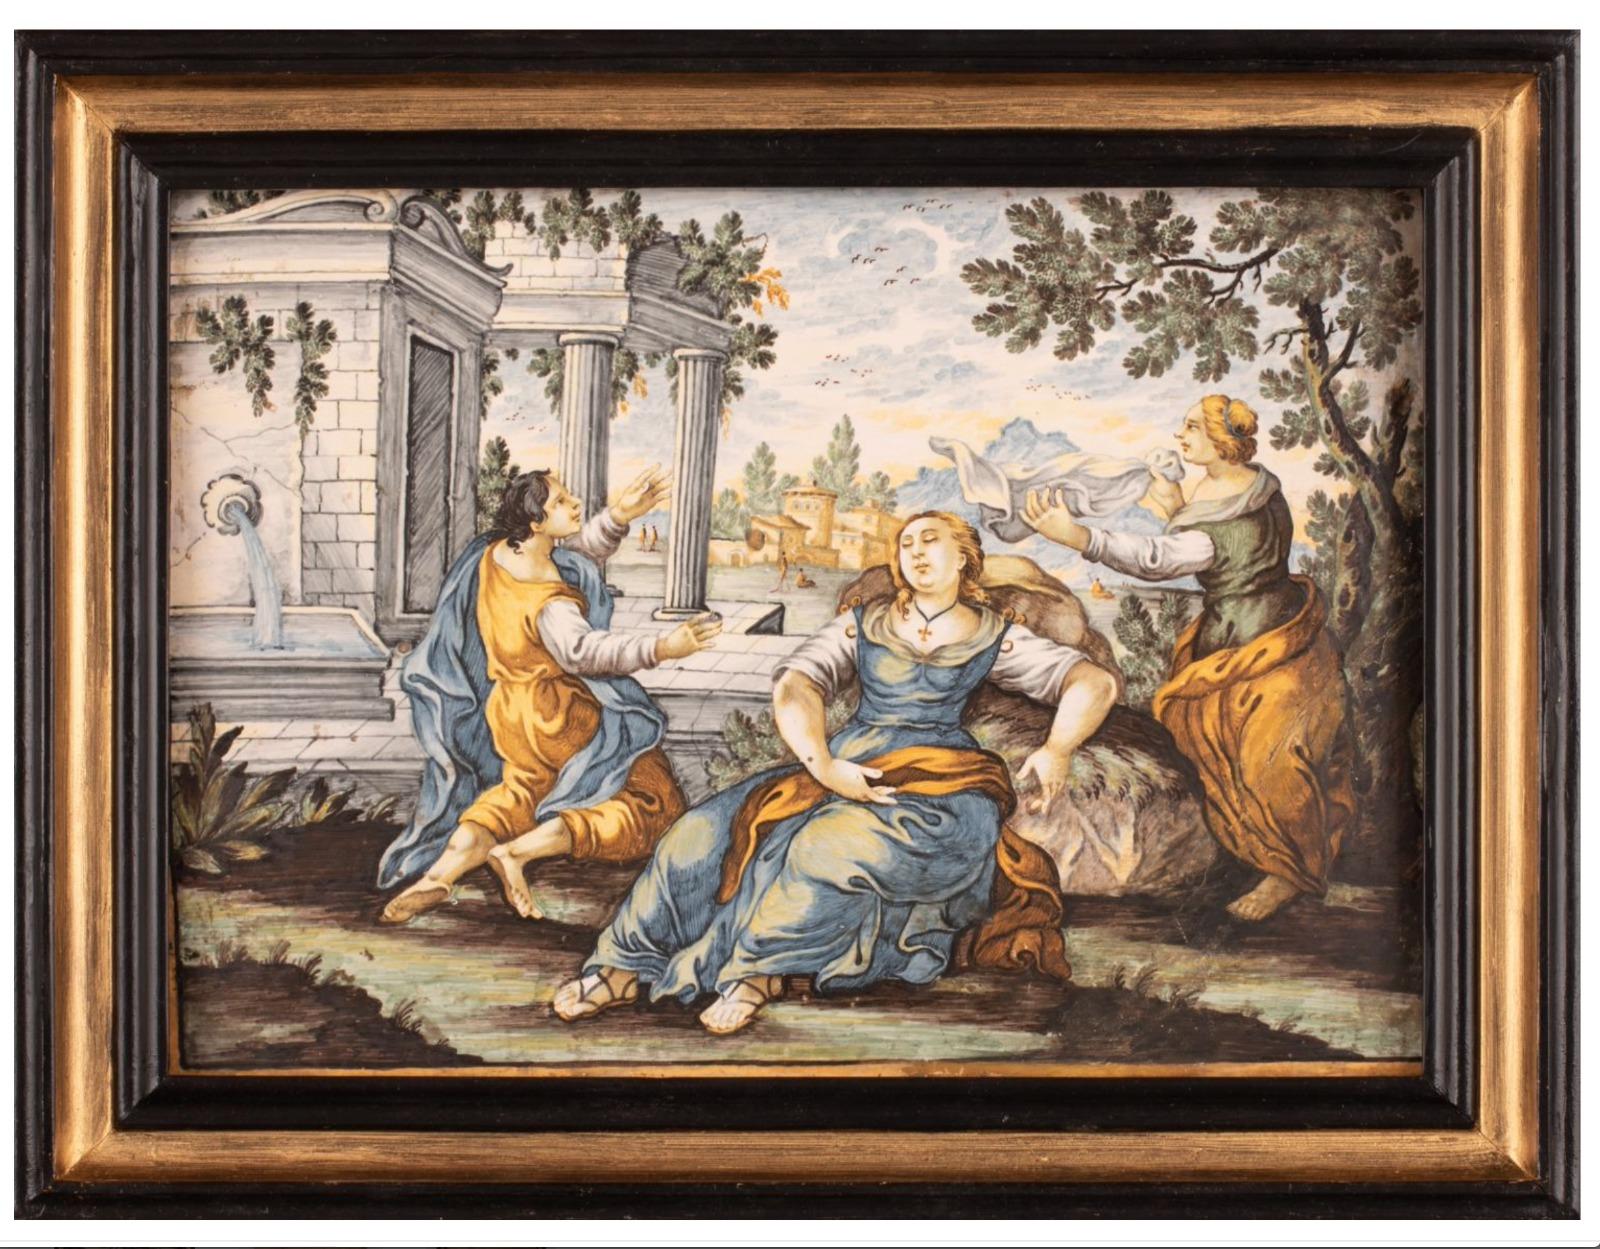 Gentili Manufacture, Castelli, mid-18th century.
Polychrome majolica plaque within ebonized and gilded frame, decorated with classical scene and figures, ruins and landscape with houses in the background.
Dimensions:
25x35 cm; with frame 32x42